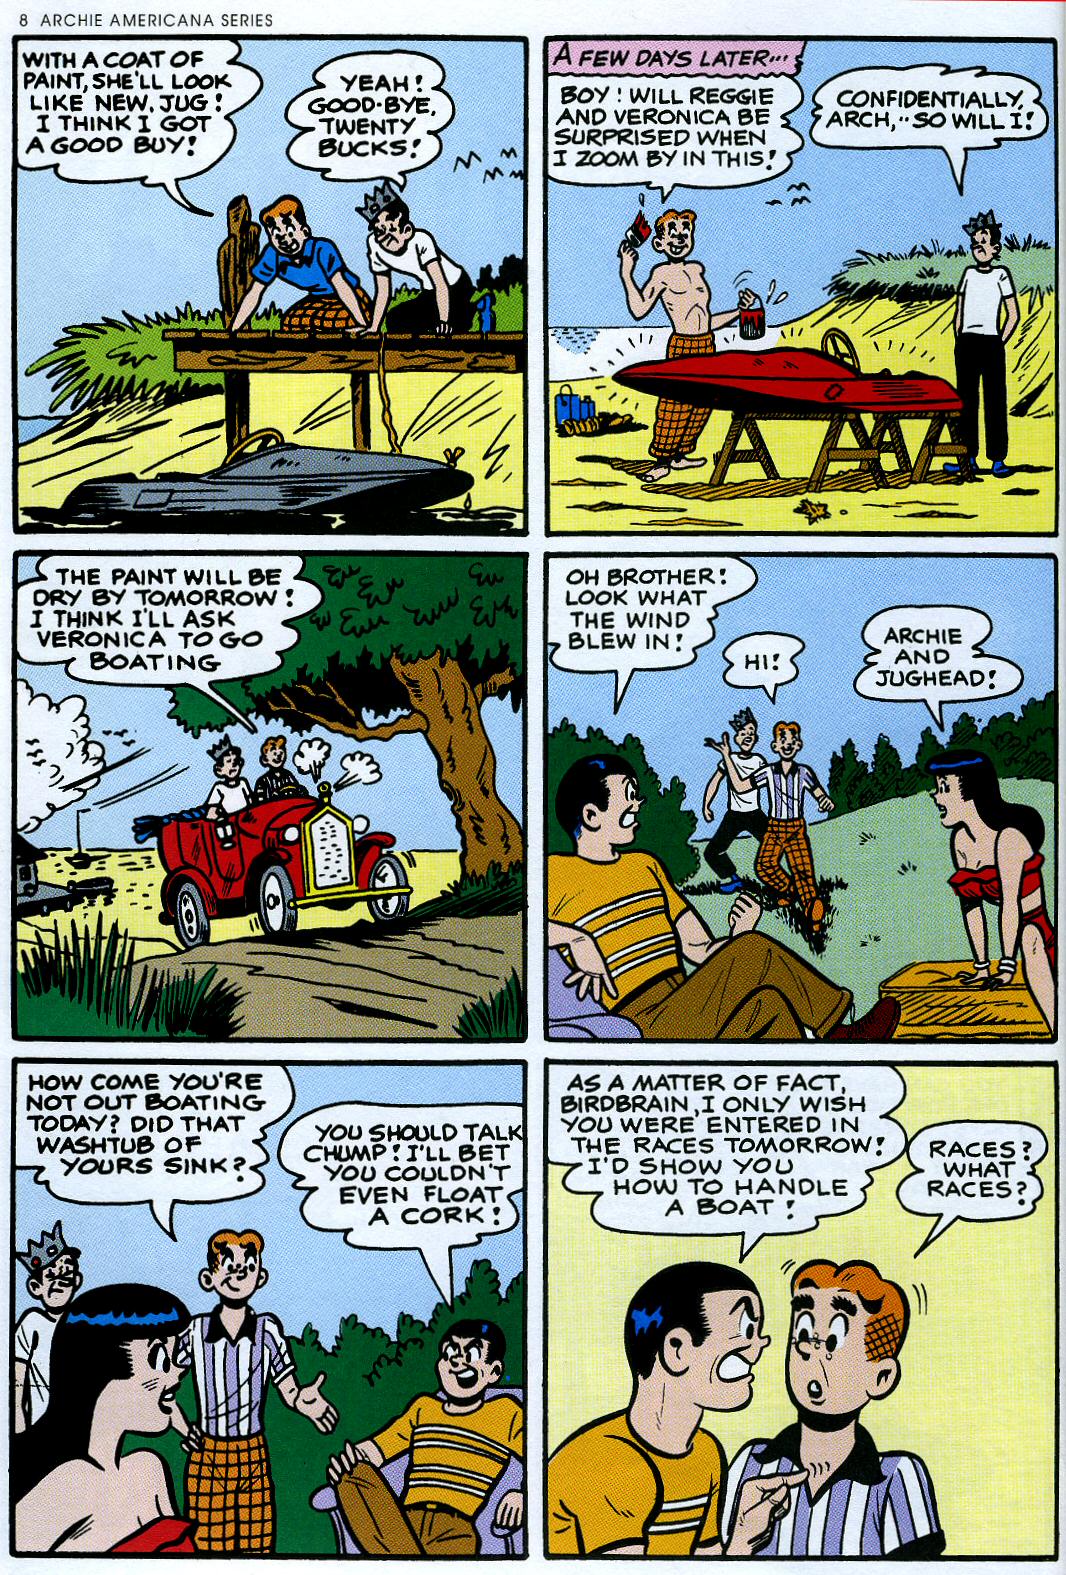 Read online Archie Americana Series comic -  Issue # TPB 2 - 10